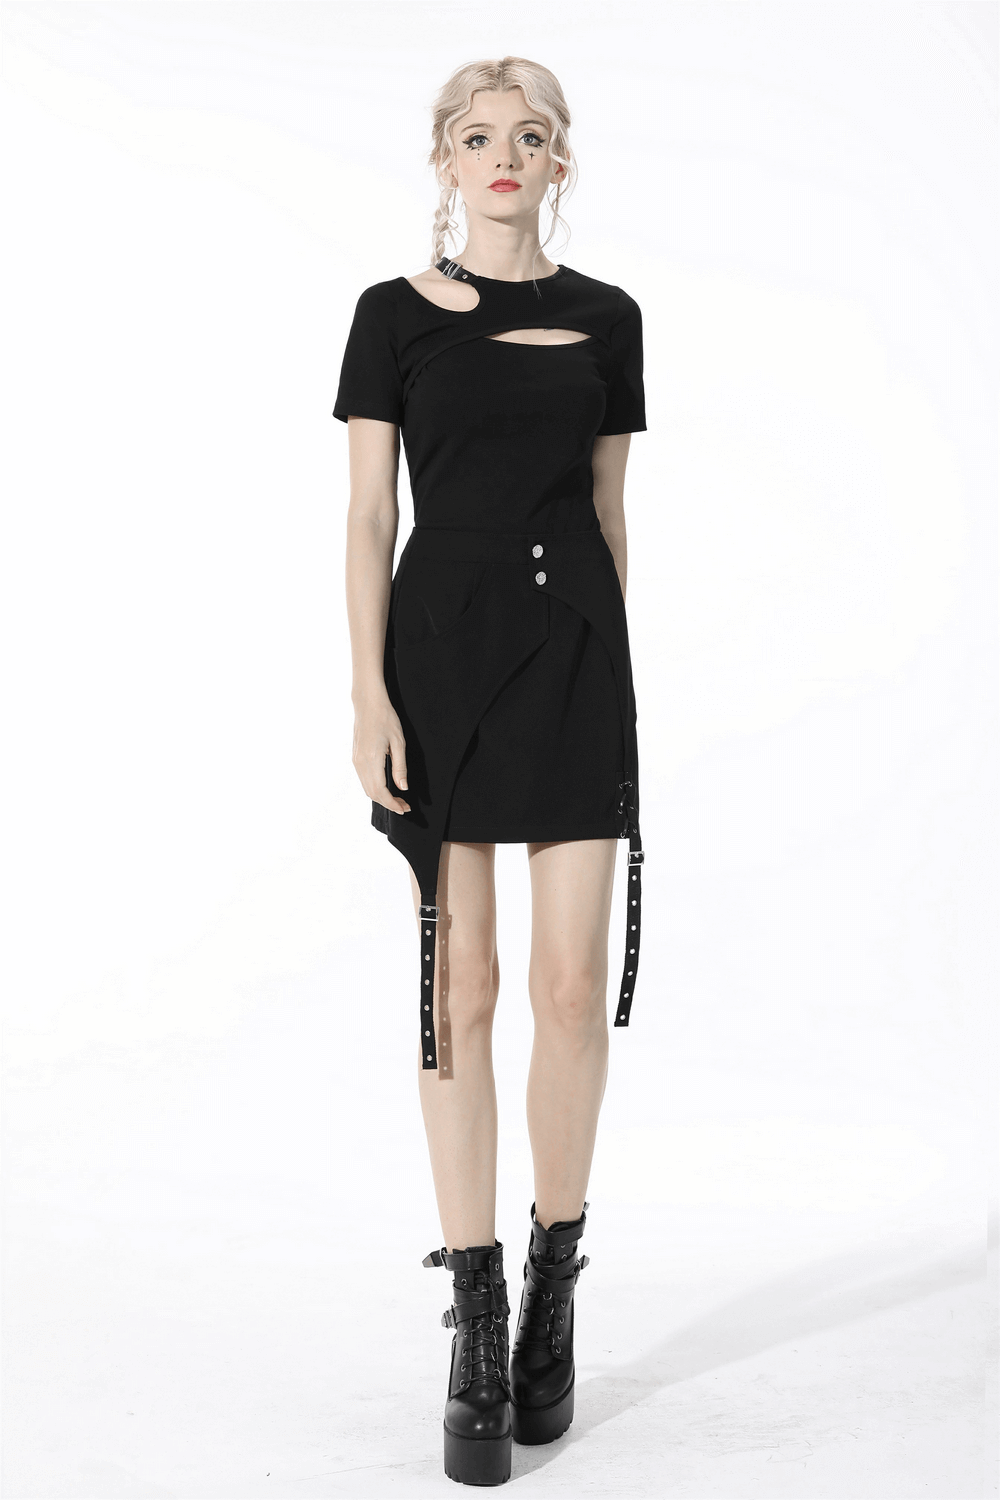 Women's Asymmetrical Mini Skirt with Buttons and Straps